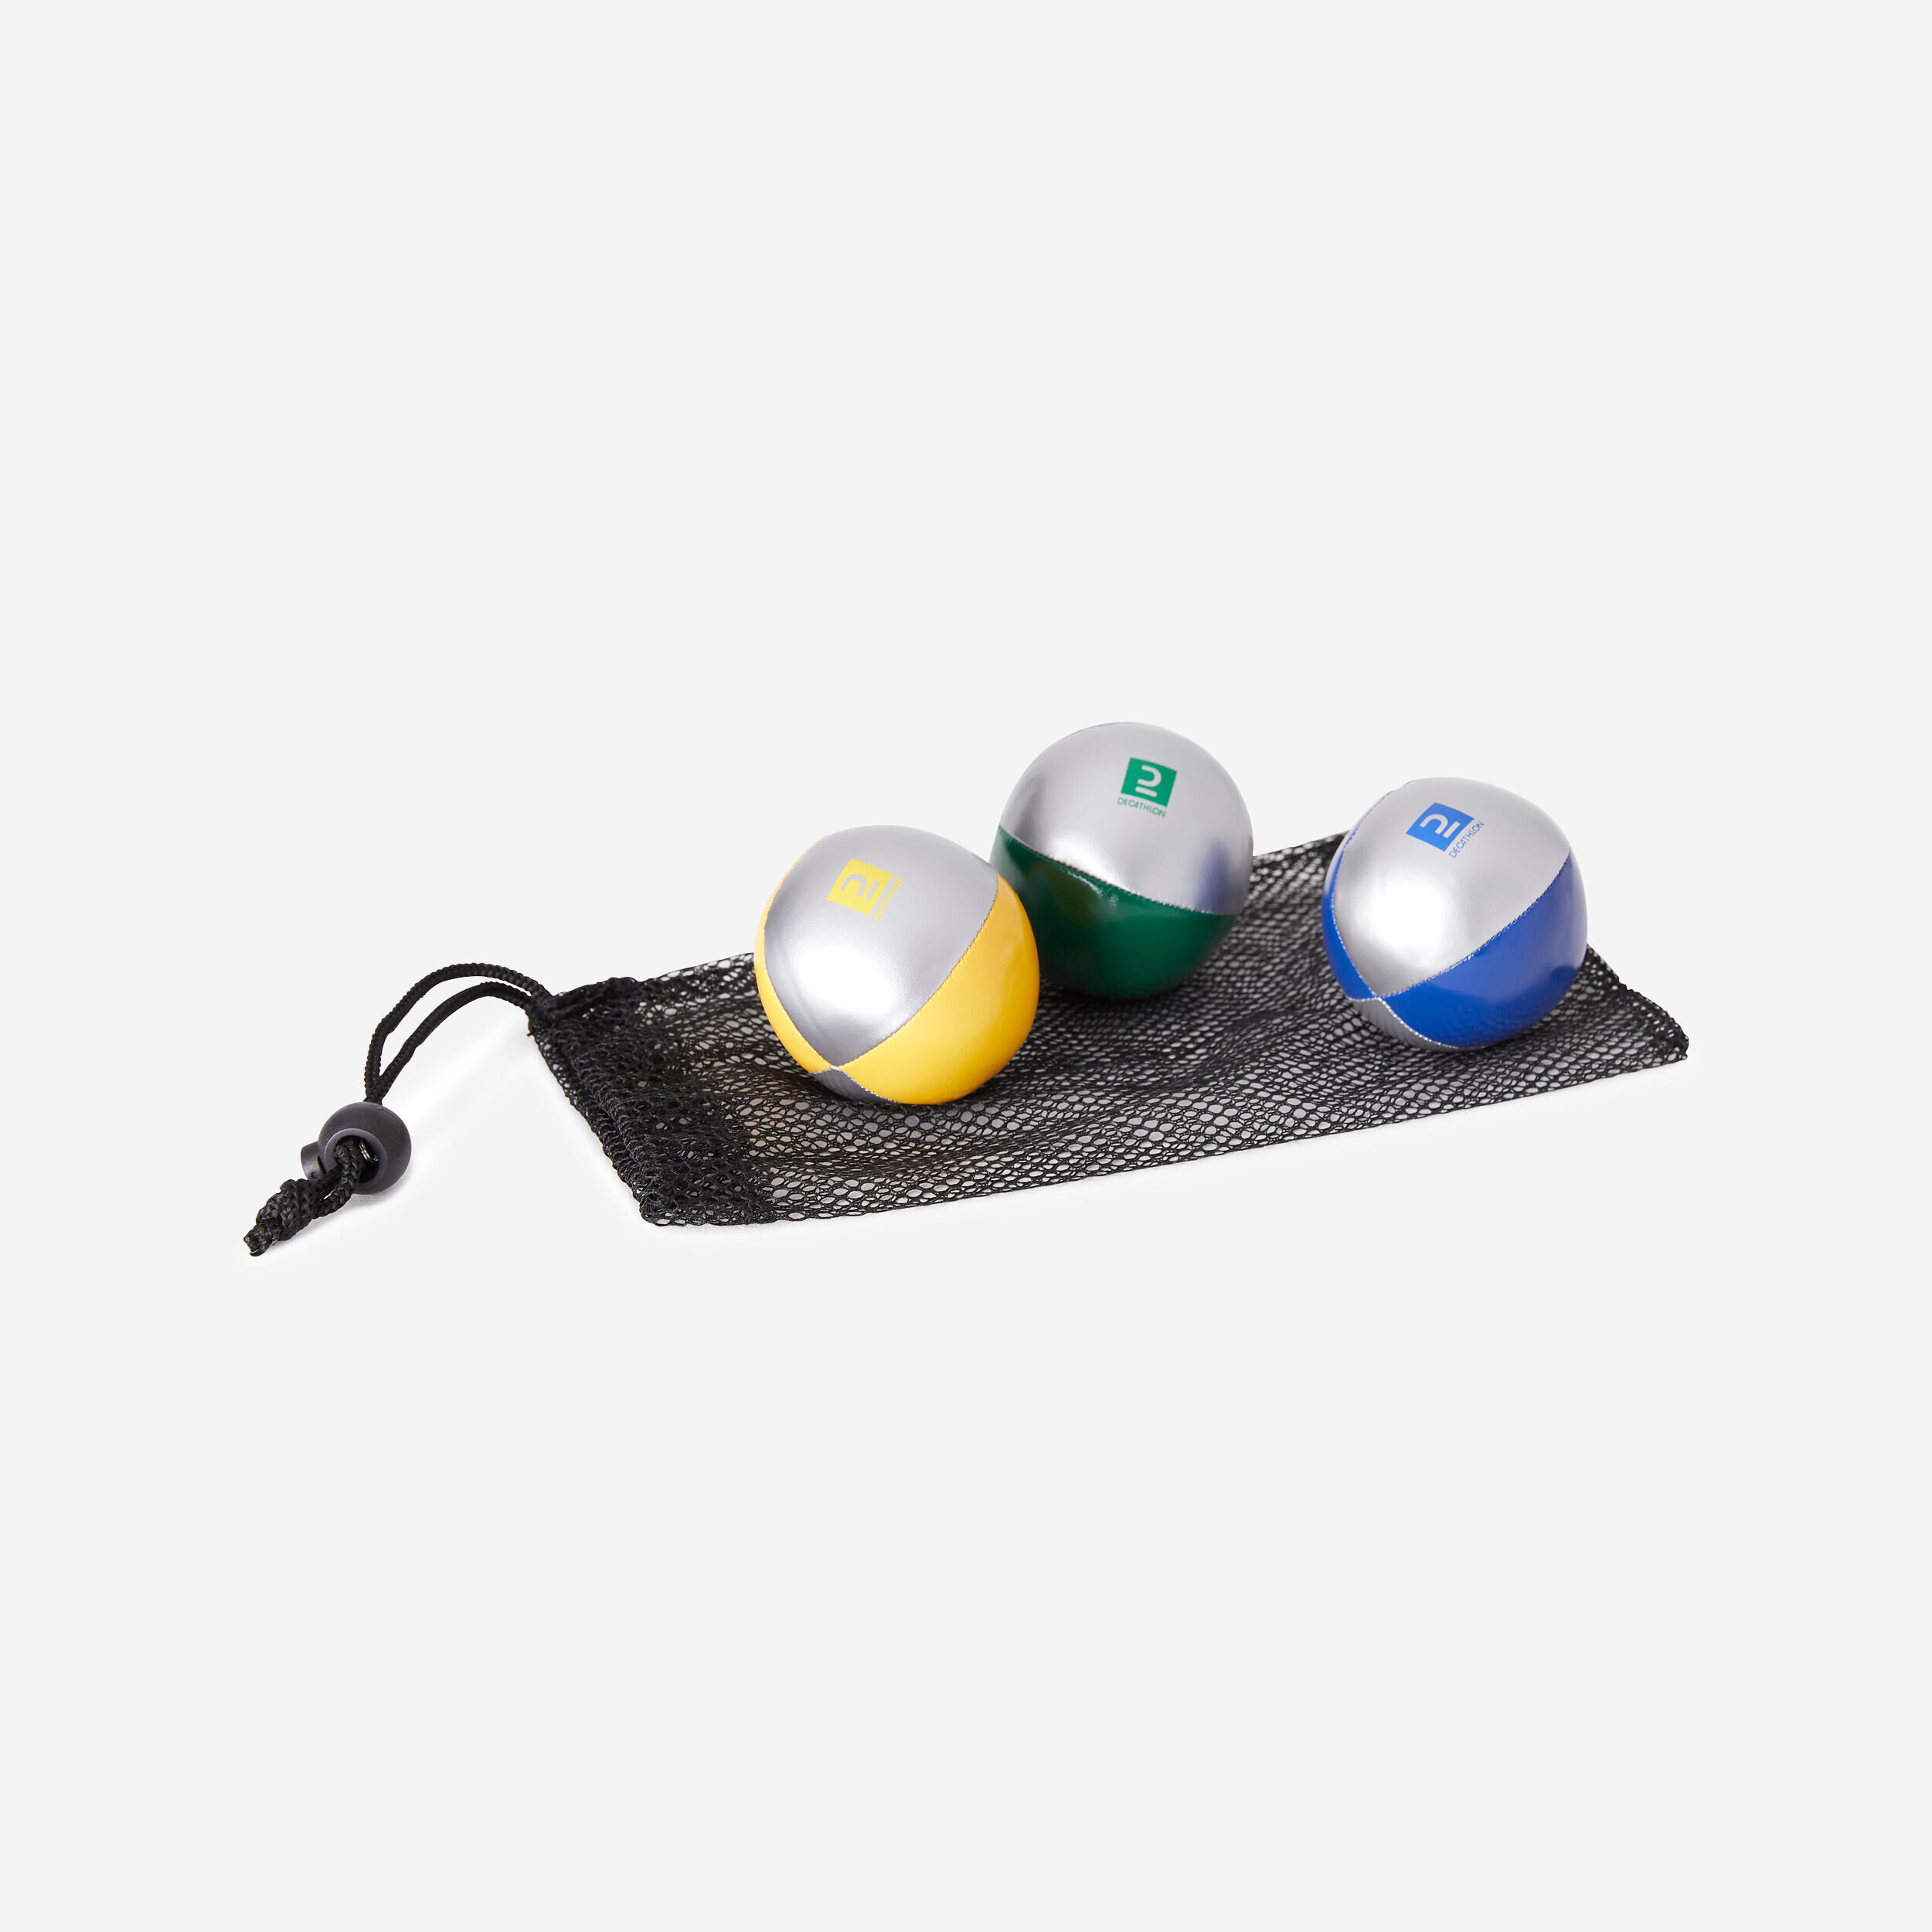 DOMYOS Three-Pack of Juggling Balls for Small Hands 55 mm, 60 g and Carrying Bag